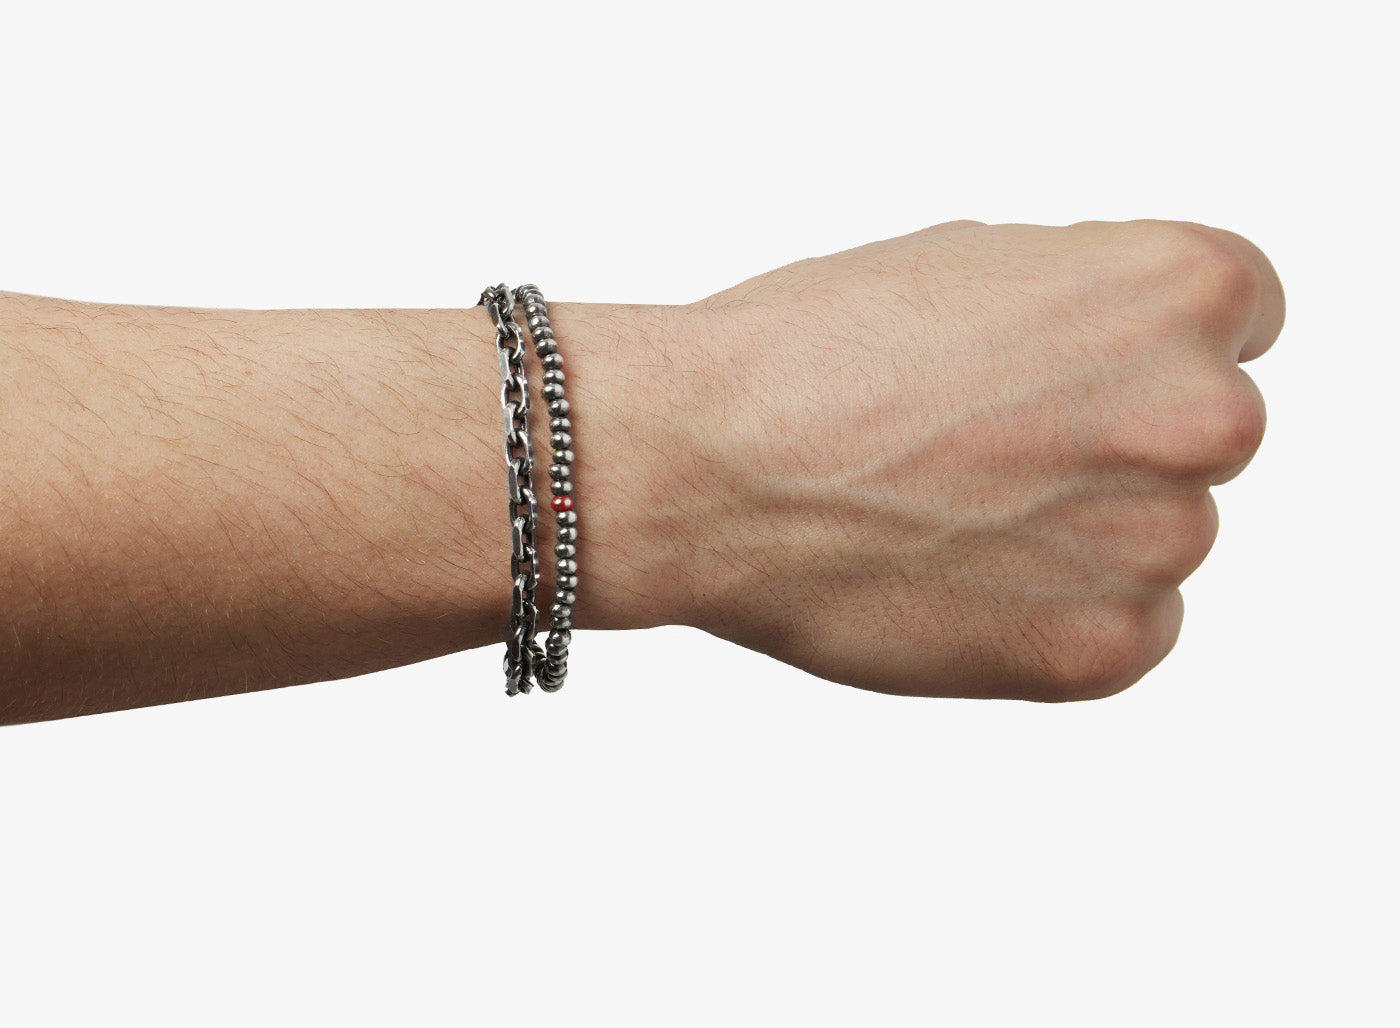 MIXED CHAIN DOUBLE WRAP BRACELET 213: this adjustable double wrap bracelet features a strand of sterling beads that connect to a solid cable chain